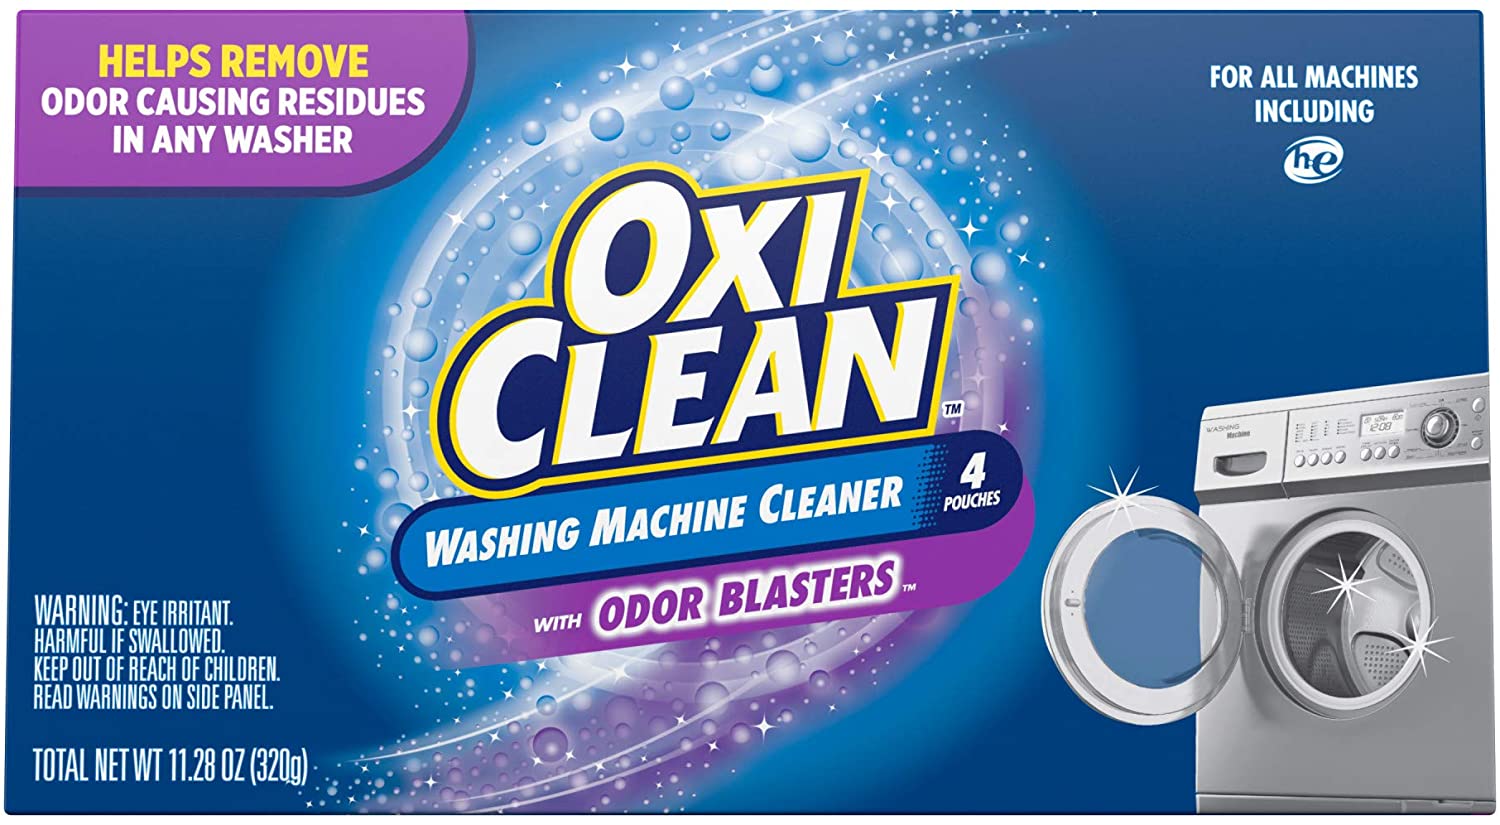 Lowest Price: OxiClean Washing Machine Cleaner with Odor